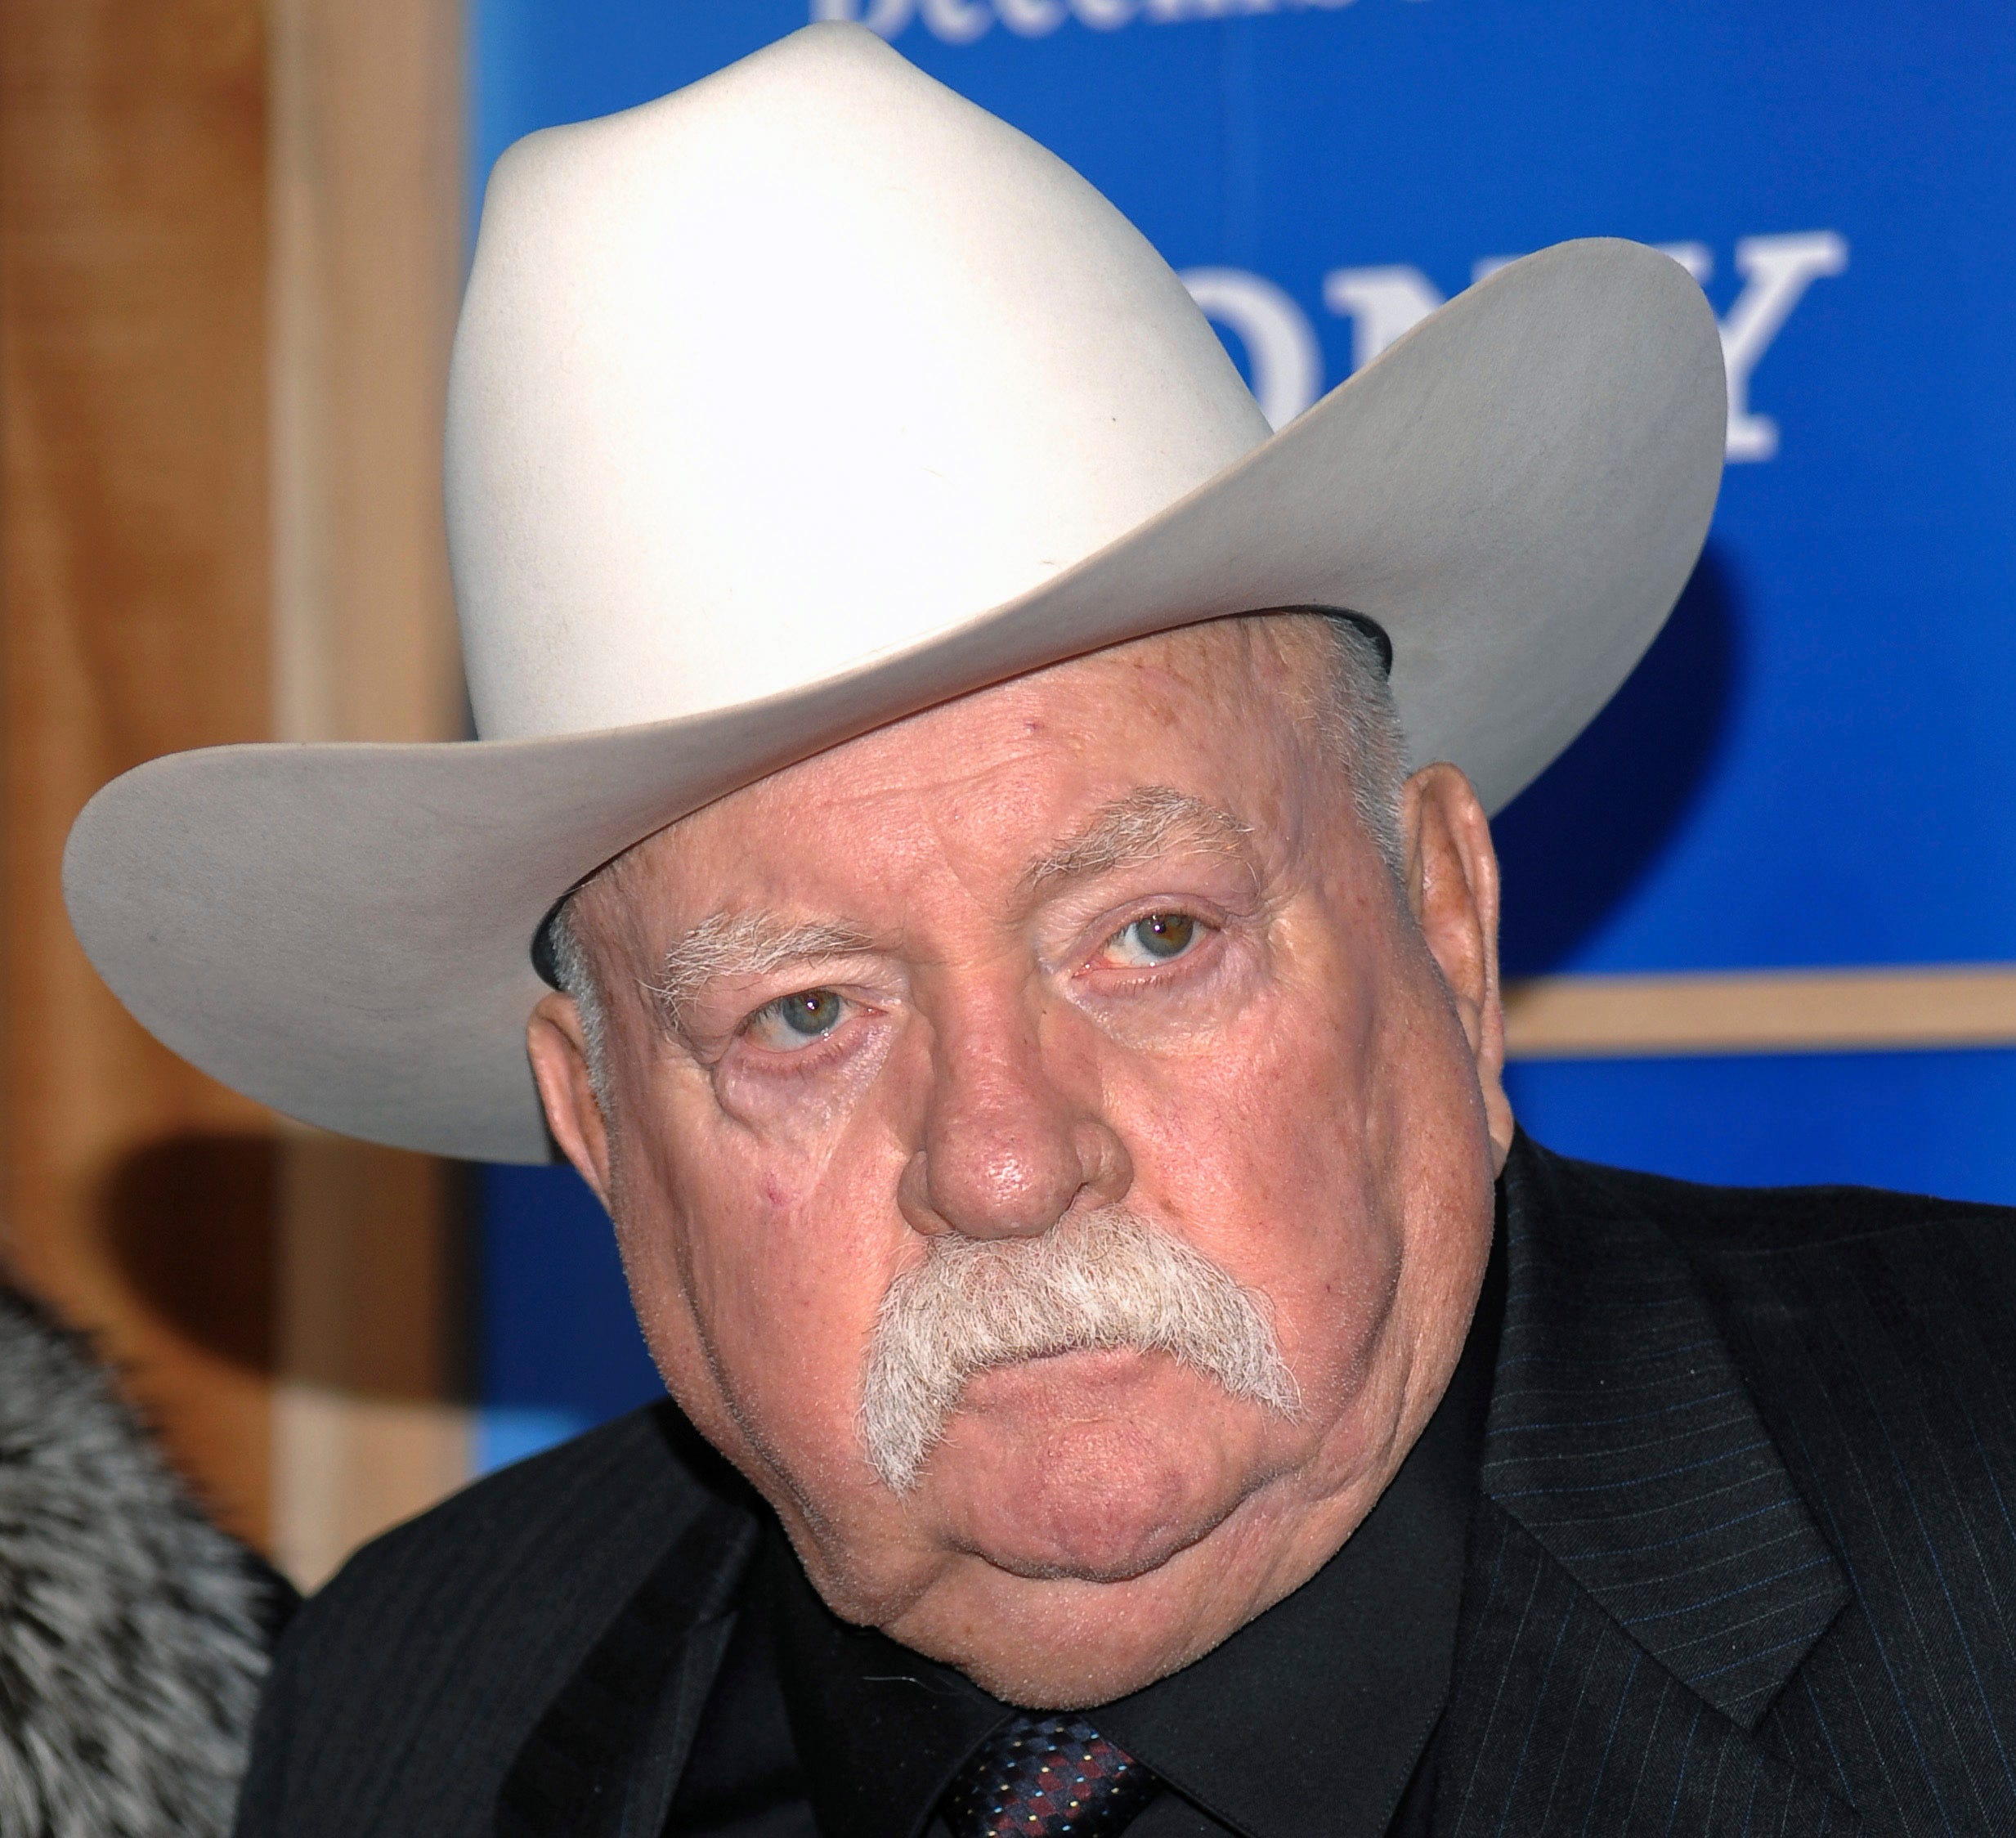 In this Monday, Dec. 14, 2009 file photo, Actor Wilford Brimley attends the premiere of 'Did You Hear About The Morgans' at the Ziegfeld Theater in New York. Wilford Brimley, who worked his way up from stunt performer to star of film such as “Cocoon” and “The Natural,” has died. He was 85. Brimley’s manager Lynda Bensky said the actor died Saturday morning, Aug. 1, 2020 in a Utah hospital.